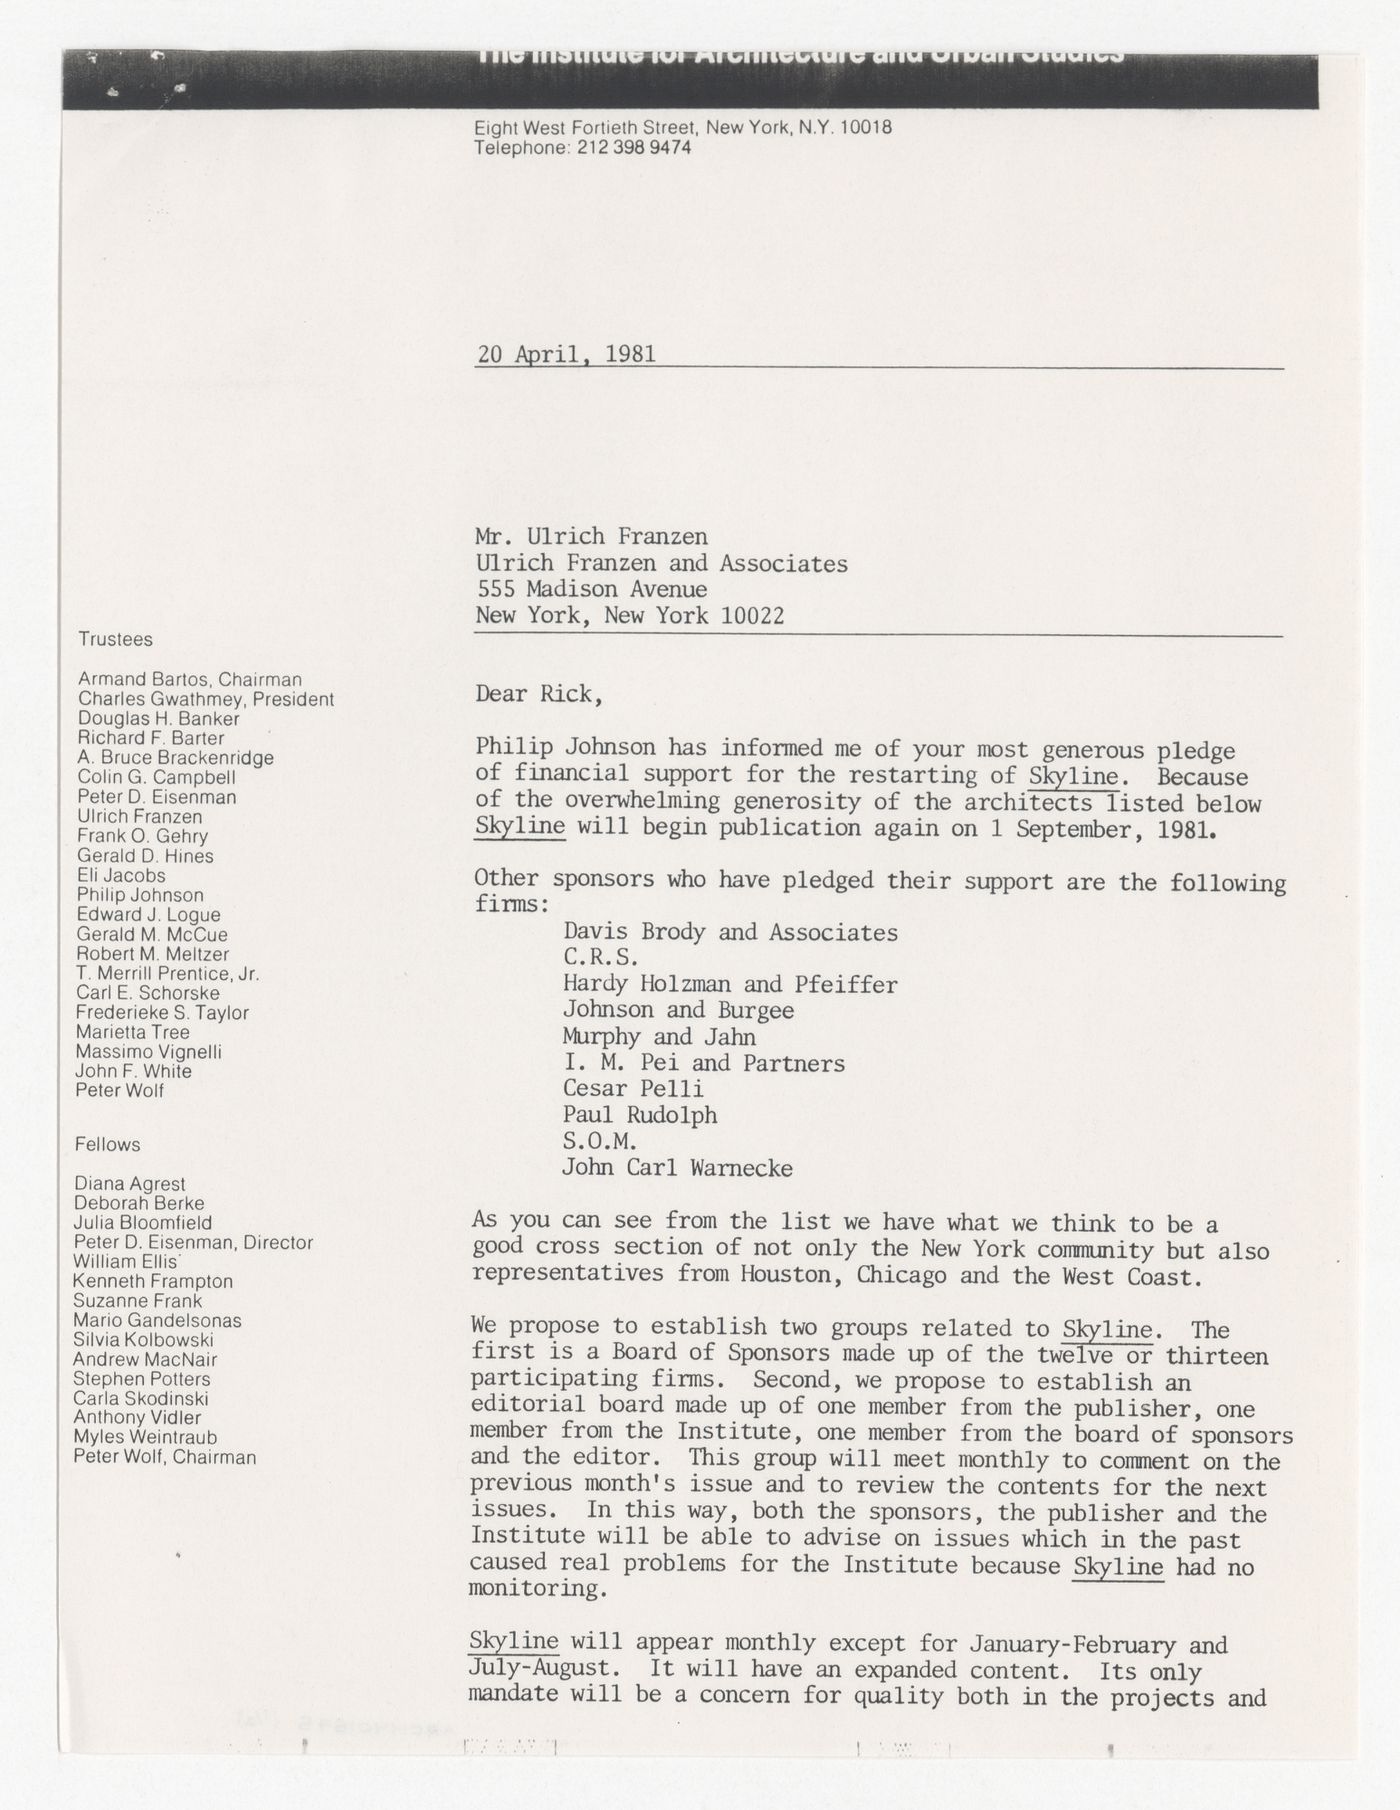 Letter from Peter D. Eisenman to Ulrich Franzen about sponsorship for Skyline